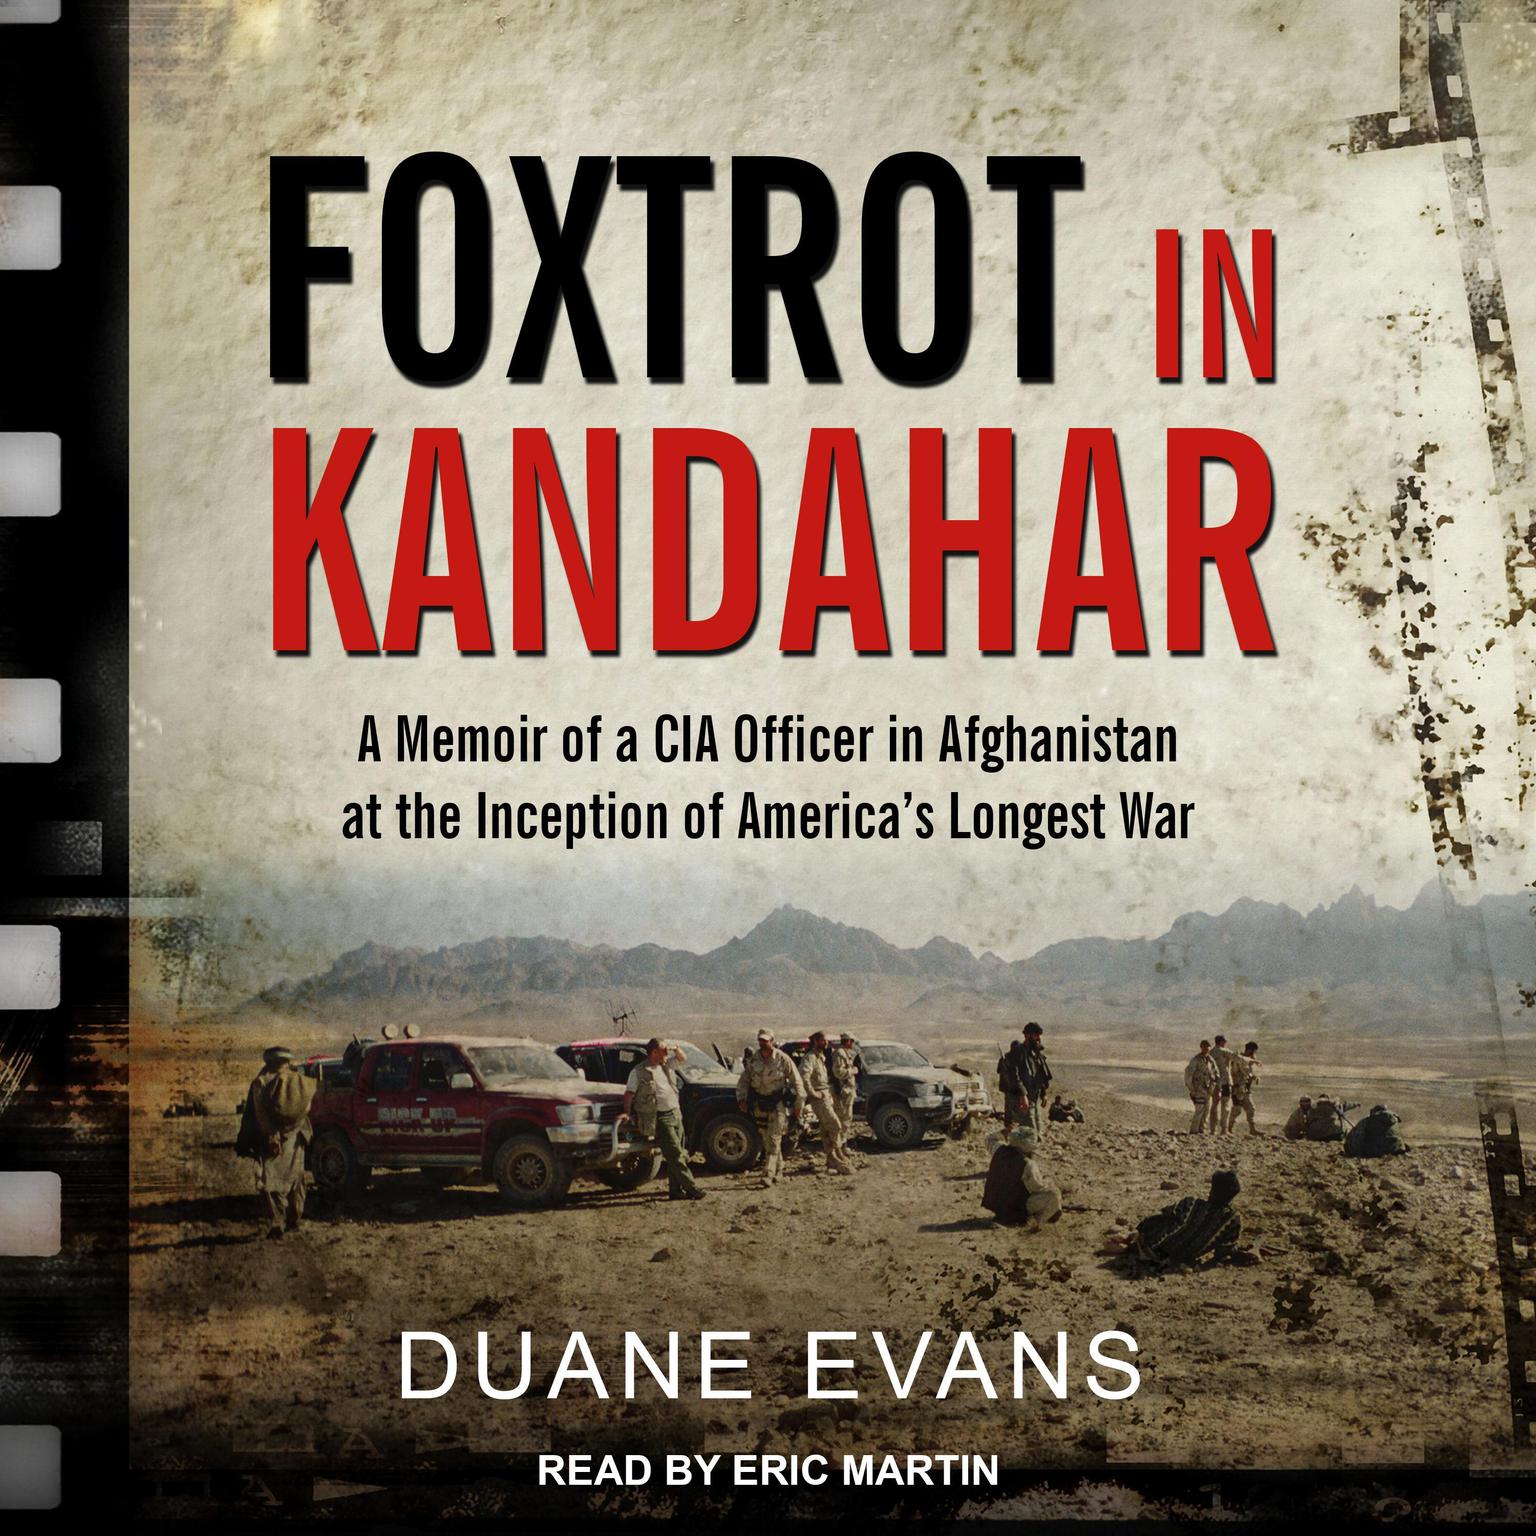 Foxtrot in Kandahar: A Memoir of a CIA Officer in Afghanistan at the Inception of America’s Longest War Audiobook, by Duane Evans